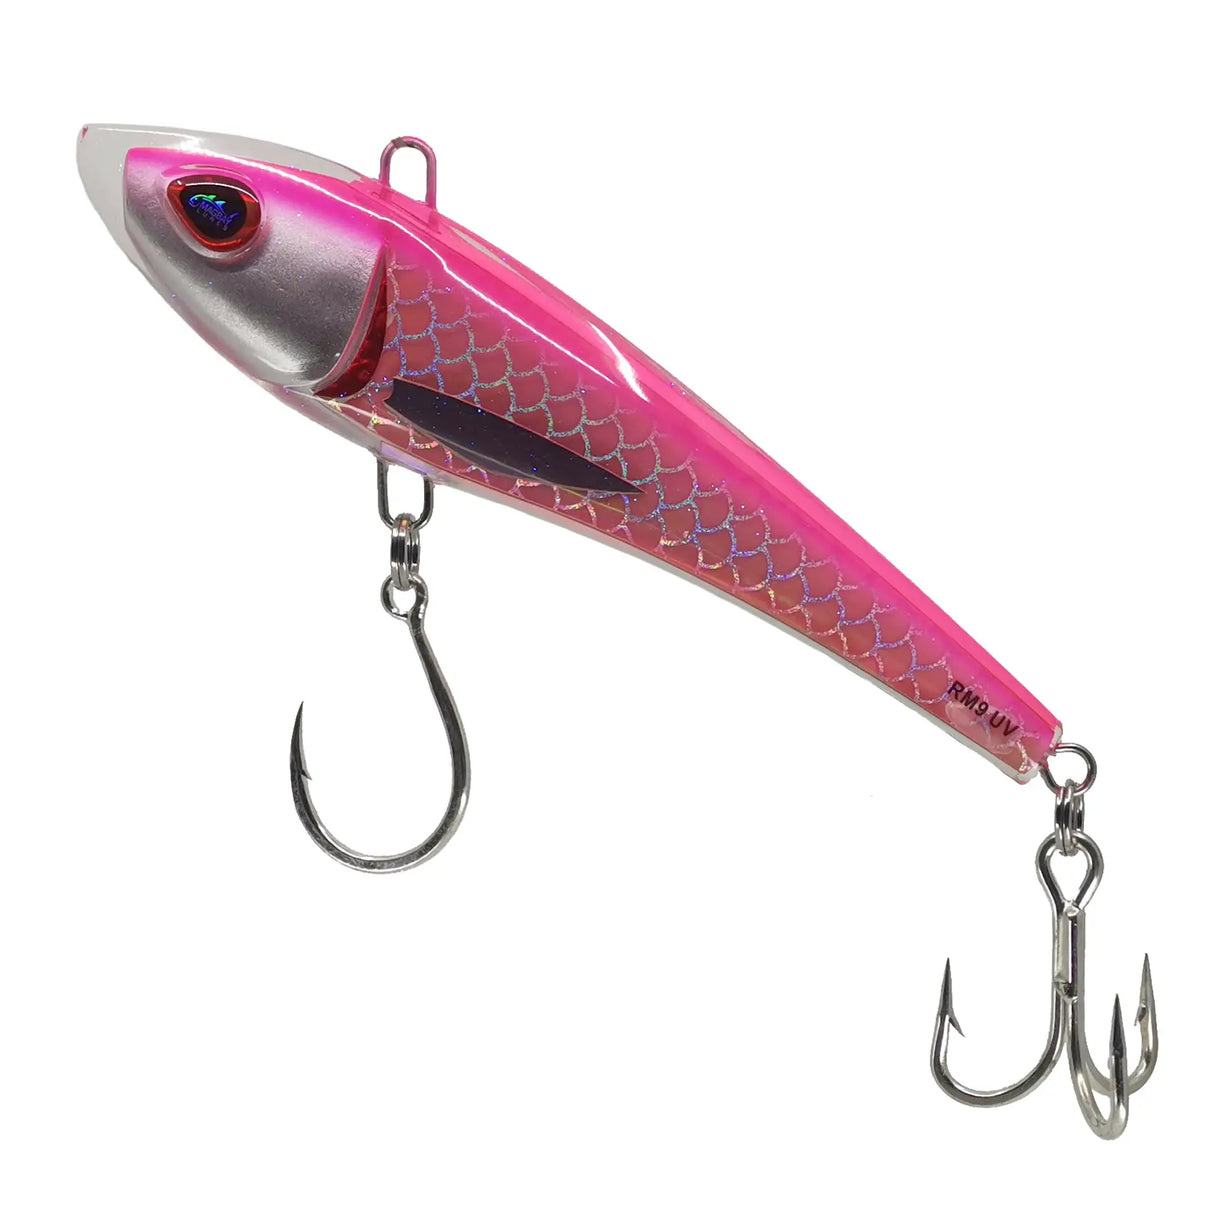 MagBay Resin Minnow RM9 Trolling Lures 9"